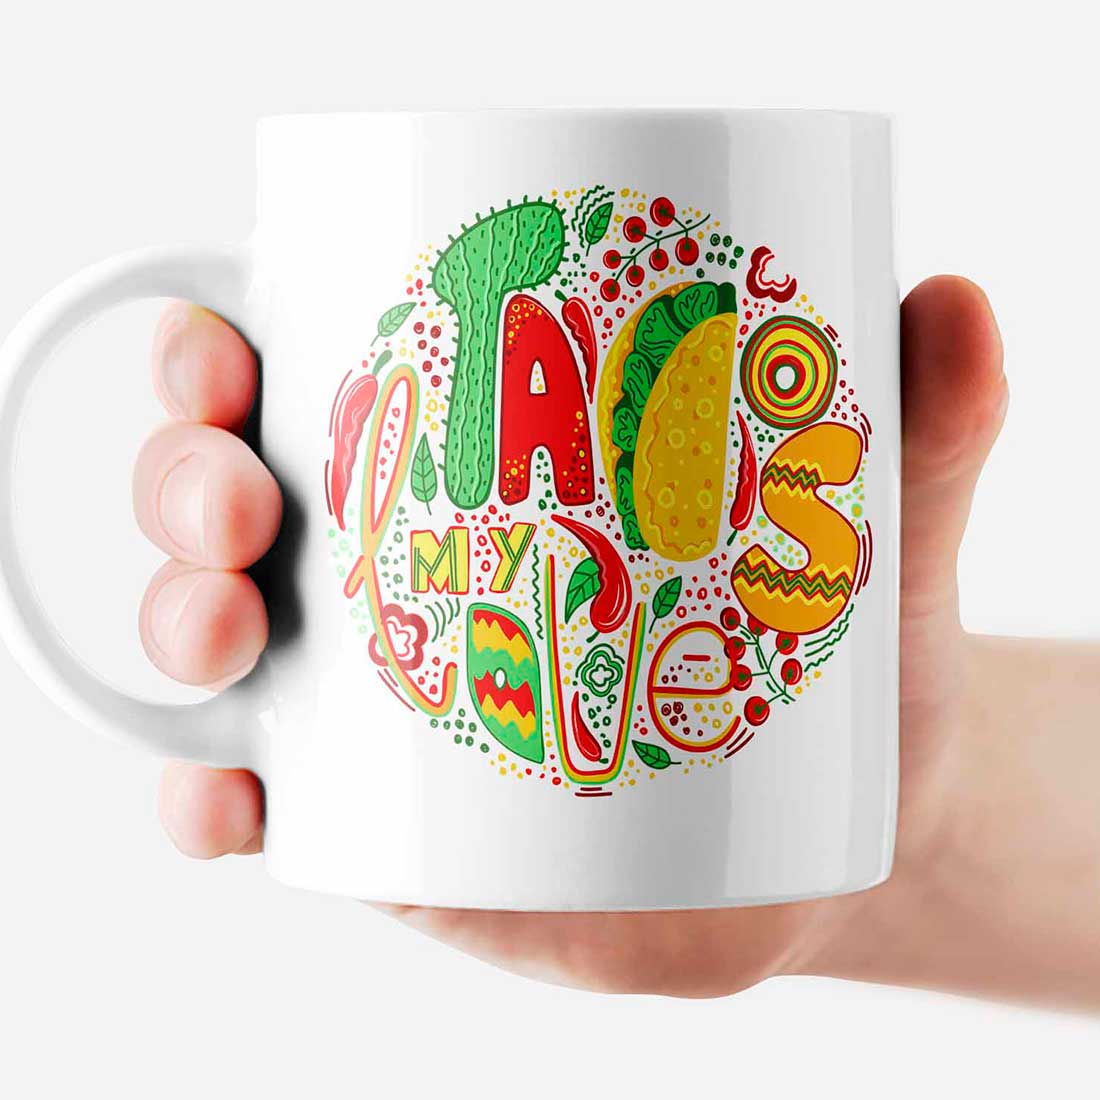 Big white tea cup with colorful taco illustration.